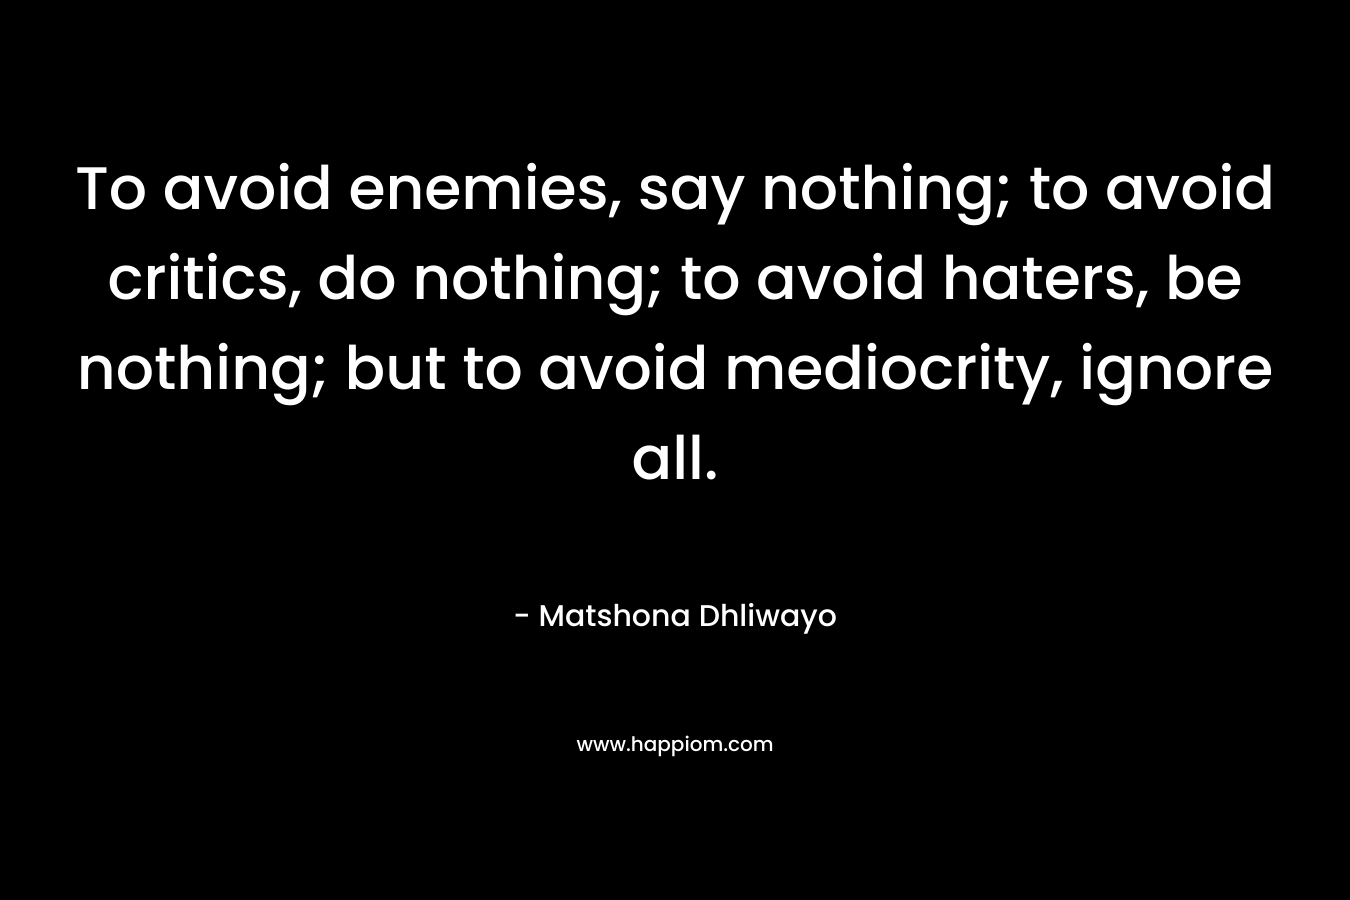 To avoid enemies, say nothing; to avoid critics, do nothing; to avoid haters, be nothing; but to avoid mediocrity, ignore all.